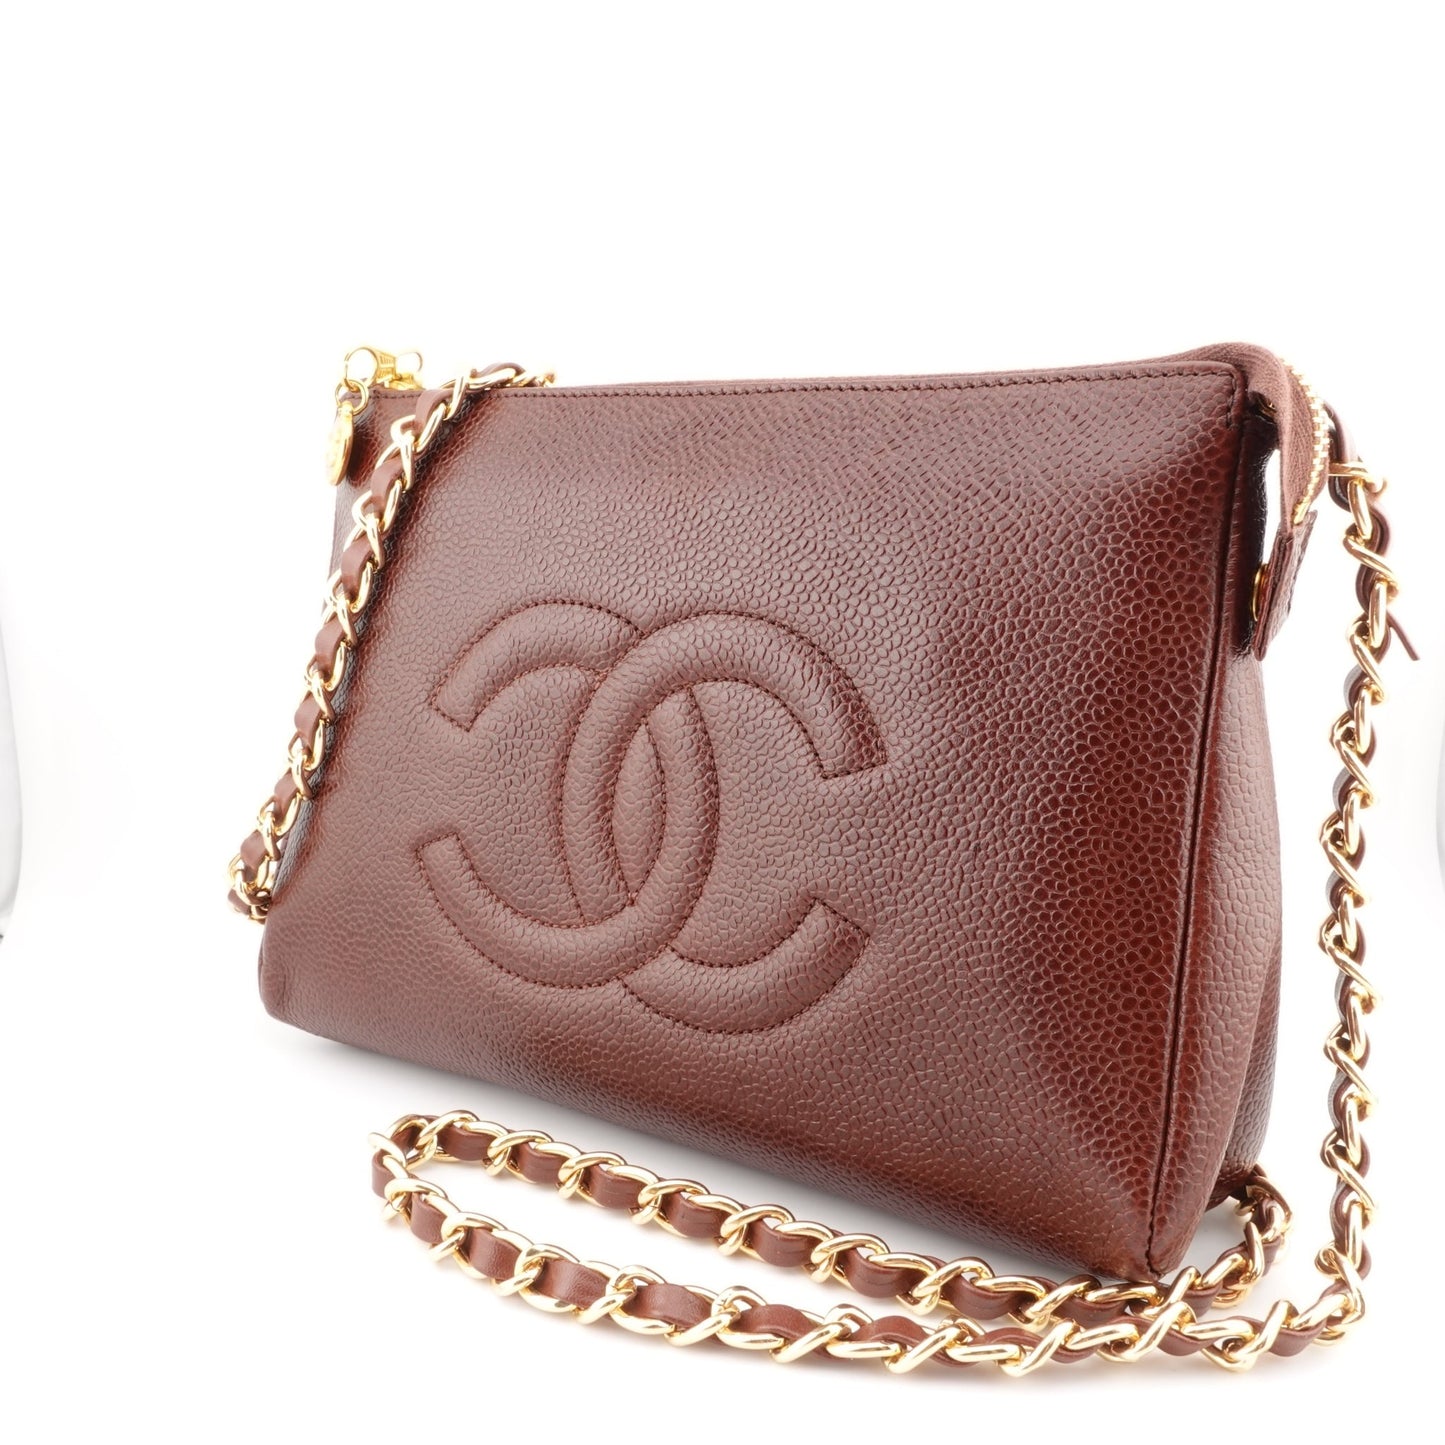 CHANEL Caviar Leather Timeless Pouch on Chain - Bag Envy